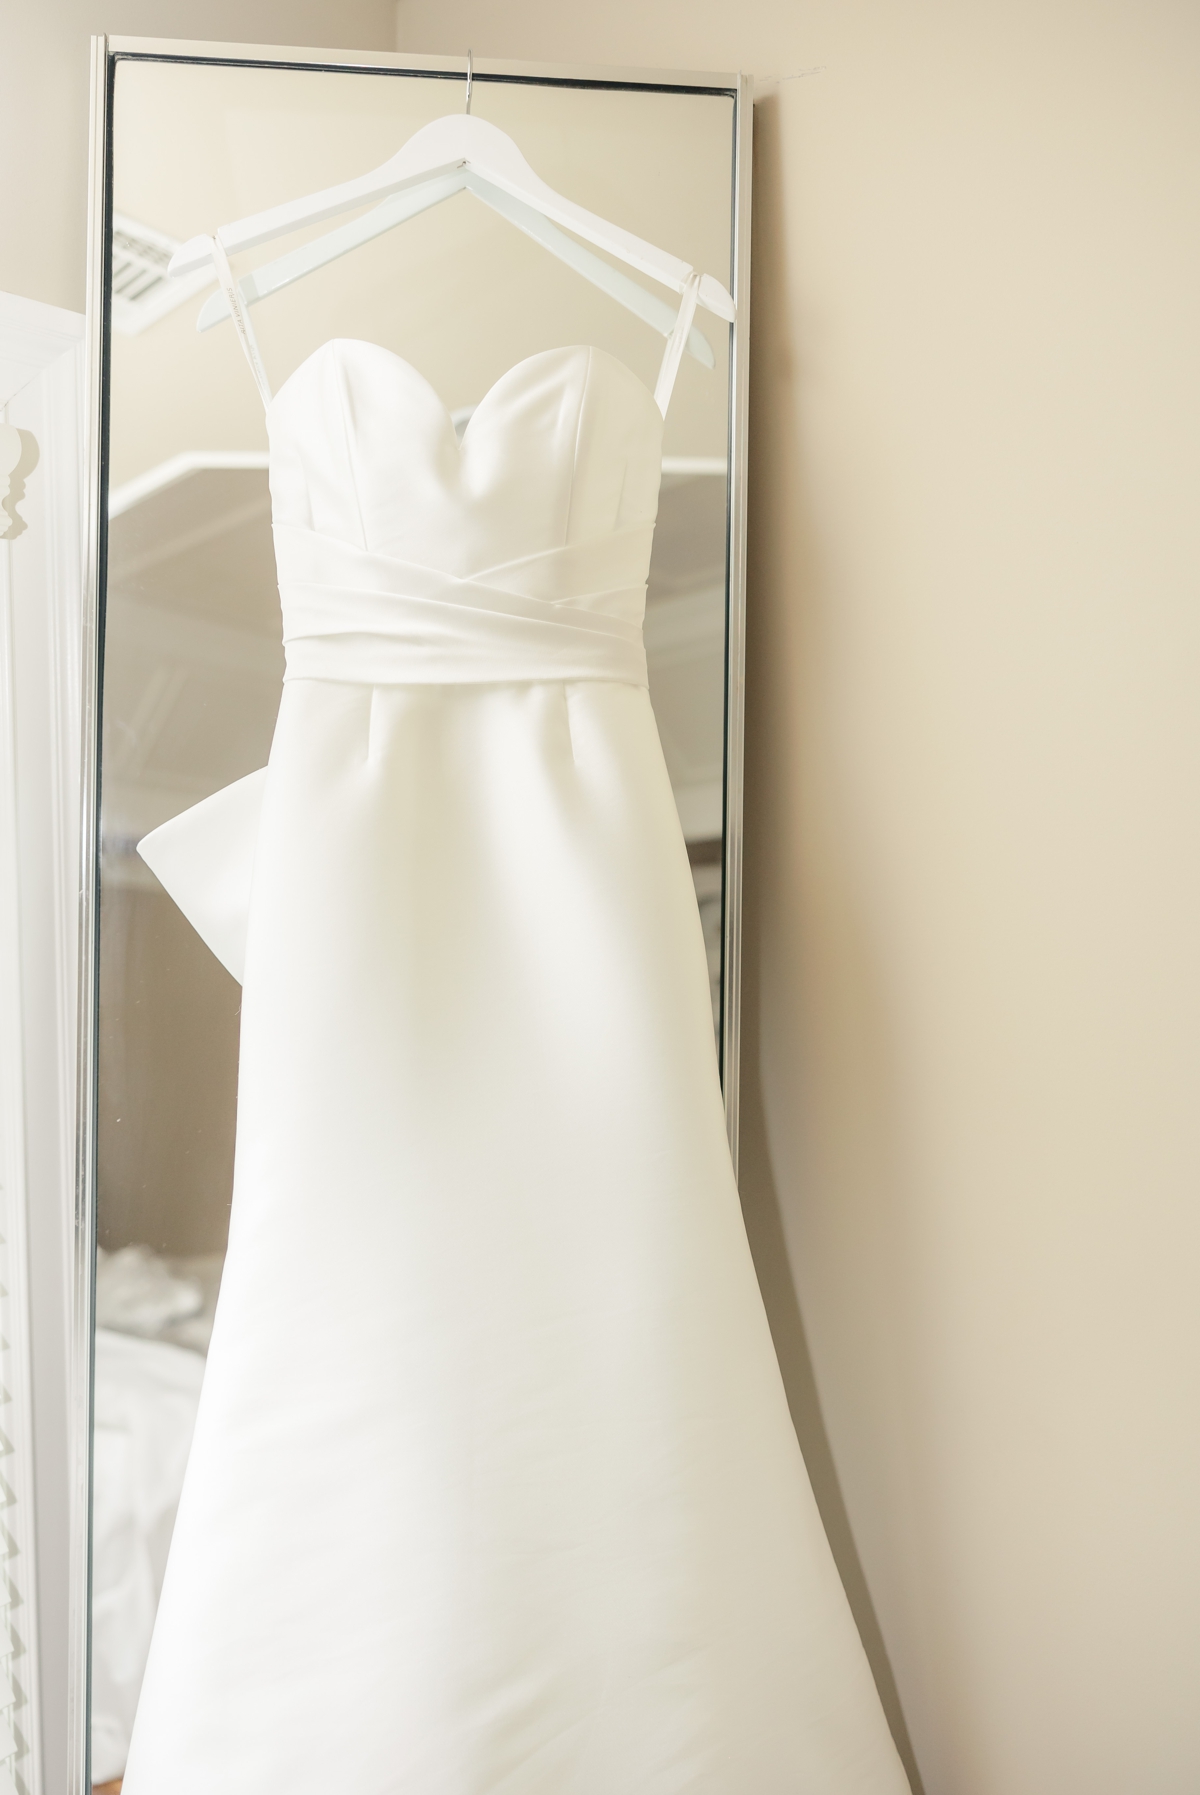 Detail photo of the bride's satin wedding gown hanging on a mirror. 